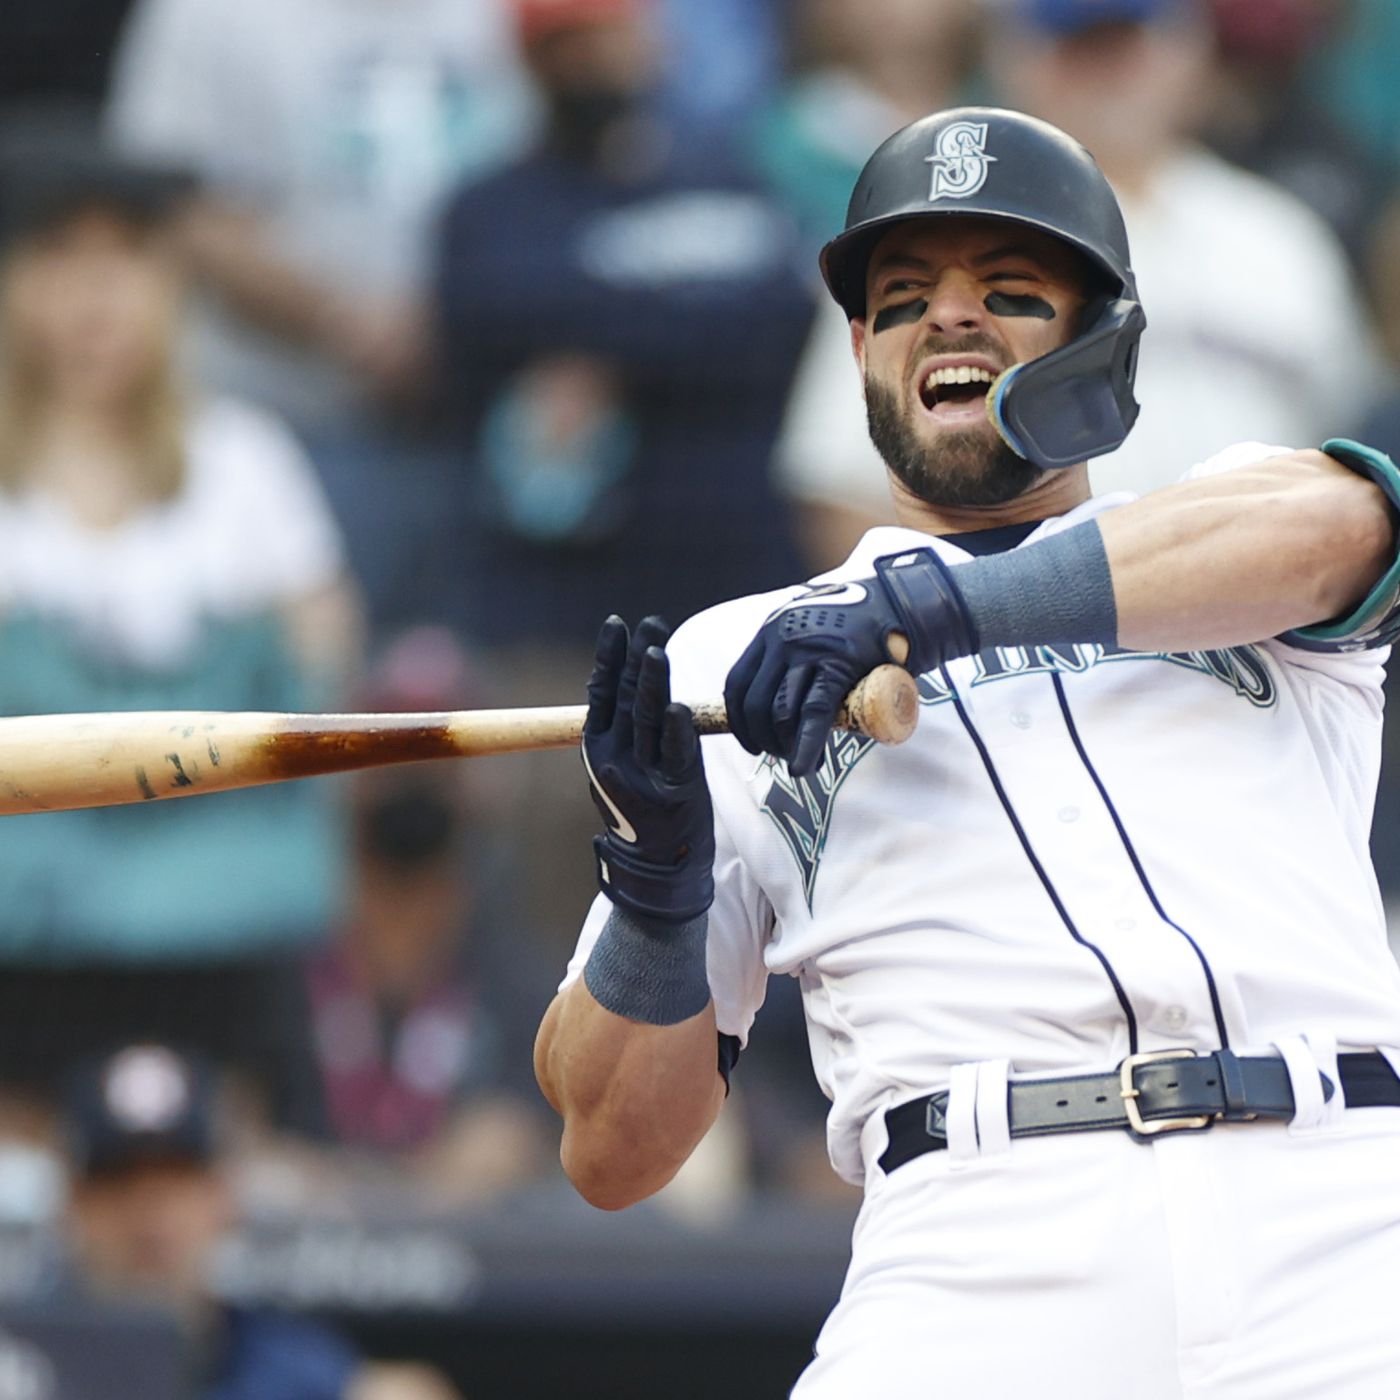 Who is Mitch Haniger married to? - ABTC